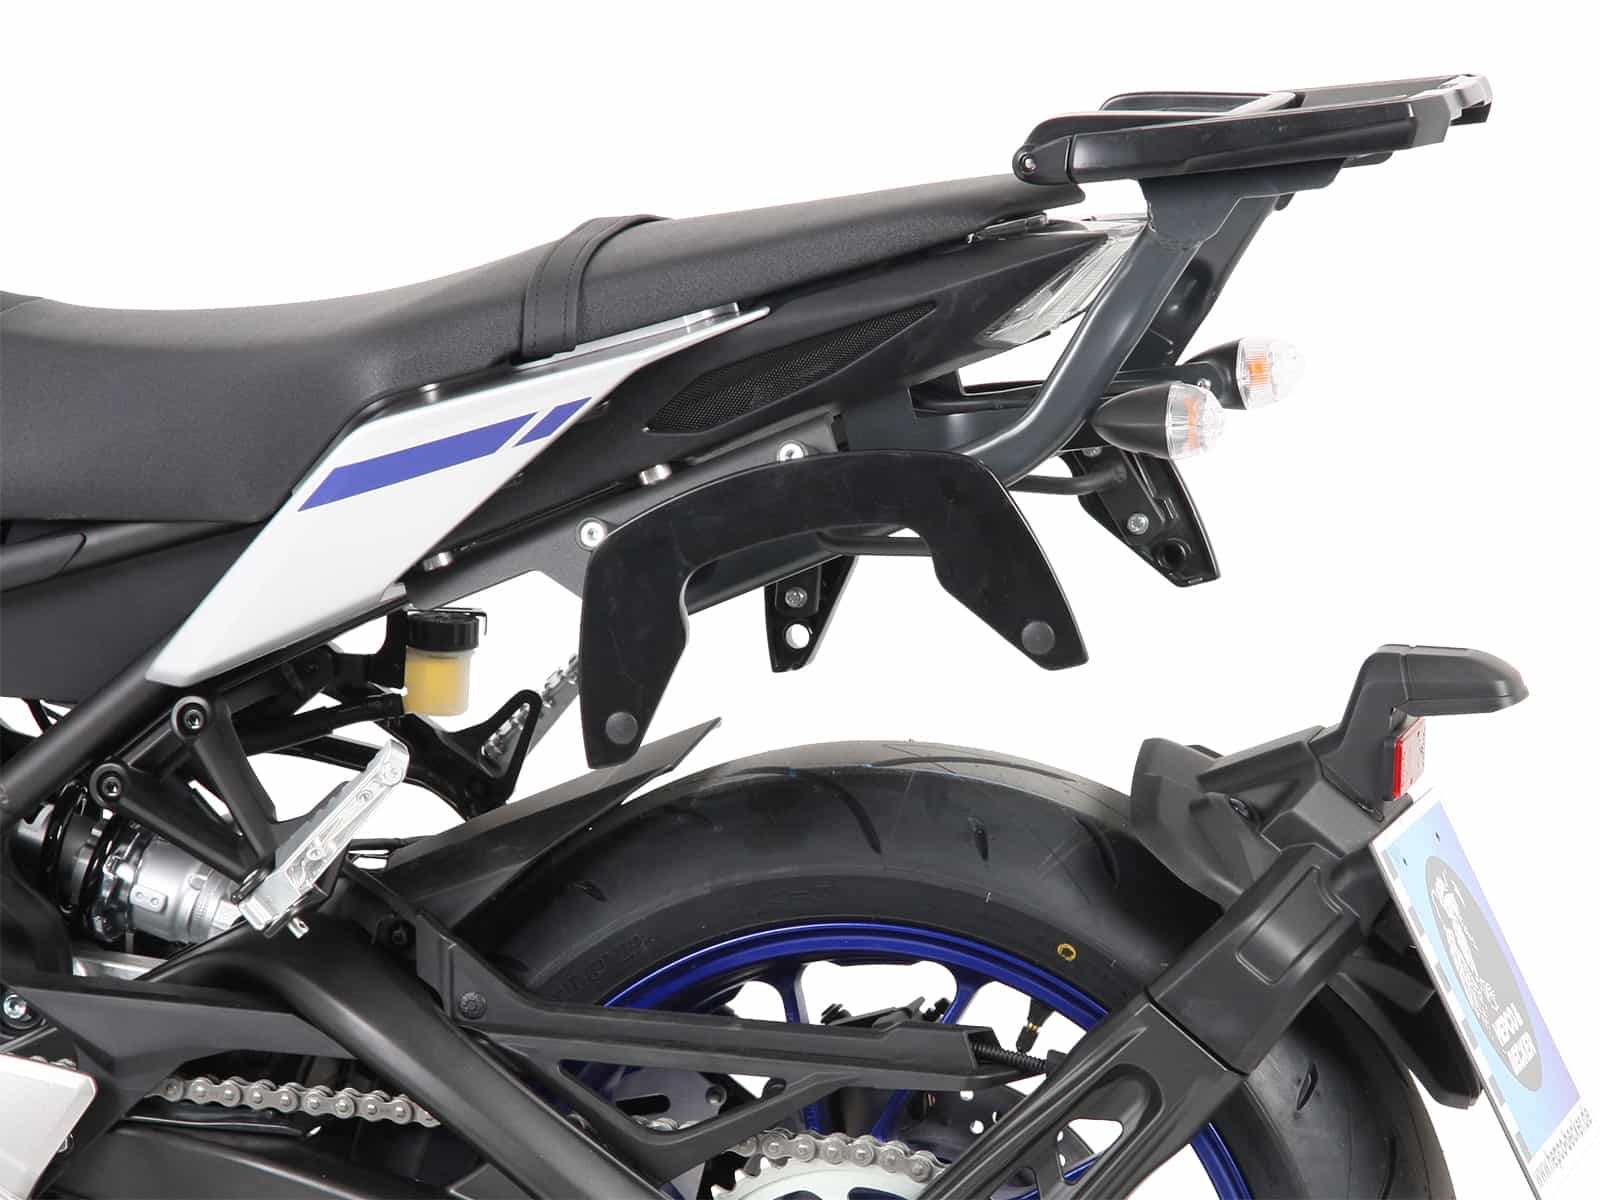 C-Bow sidecarrier for Yamaha MT-09 (2017-2020)